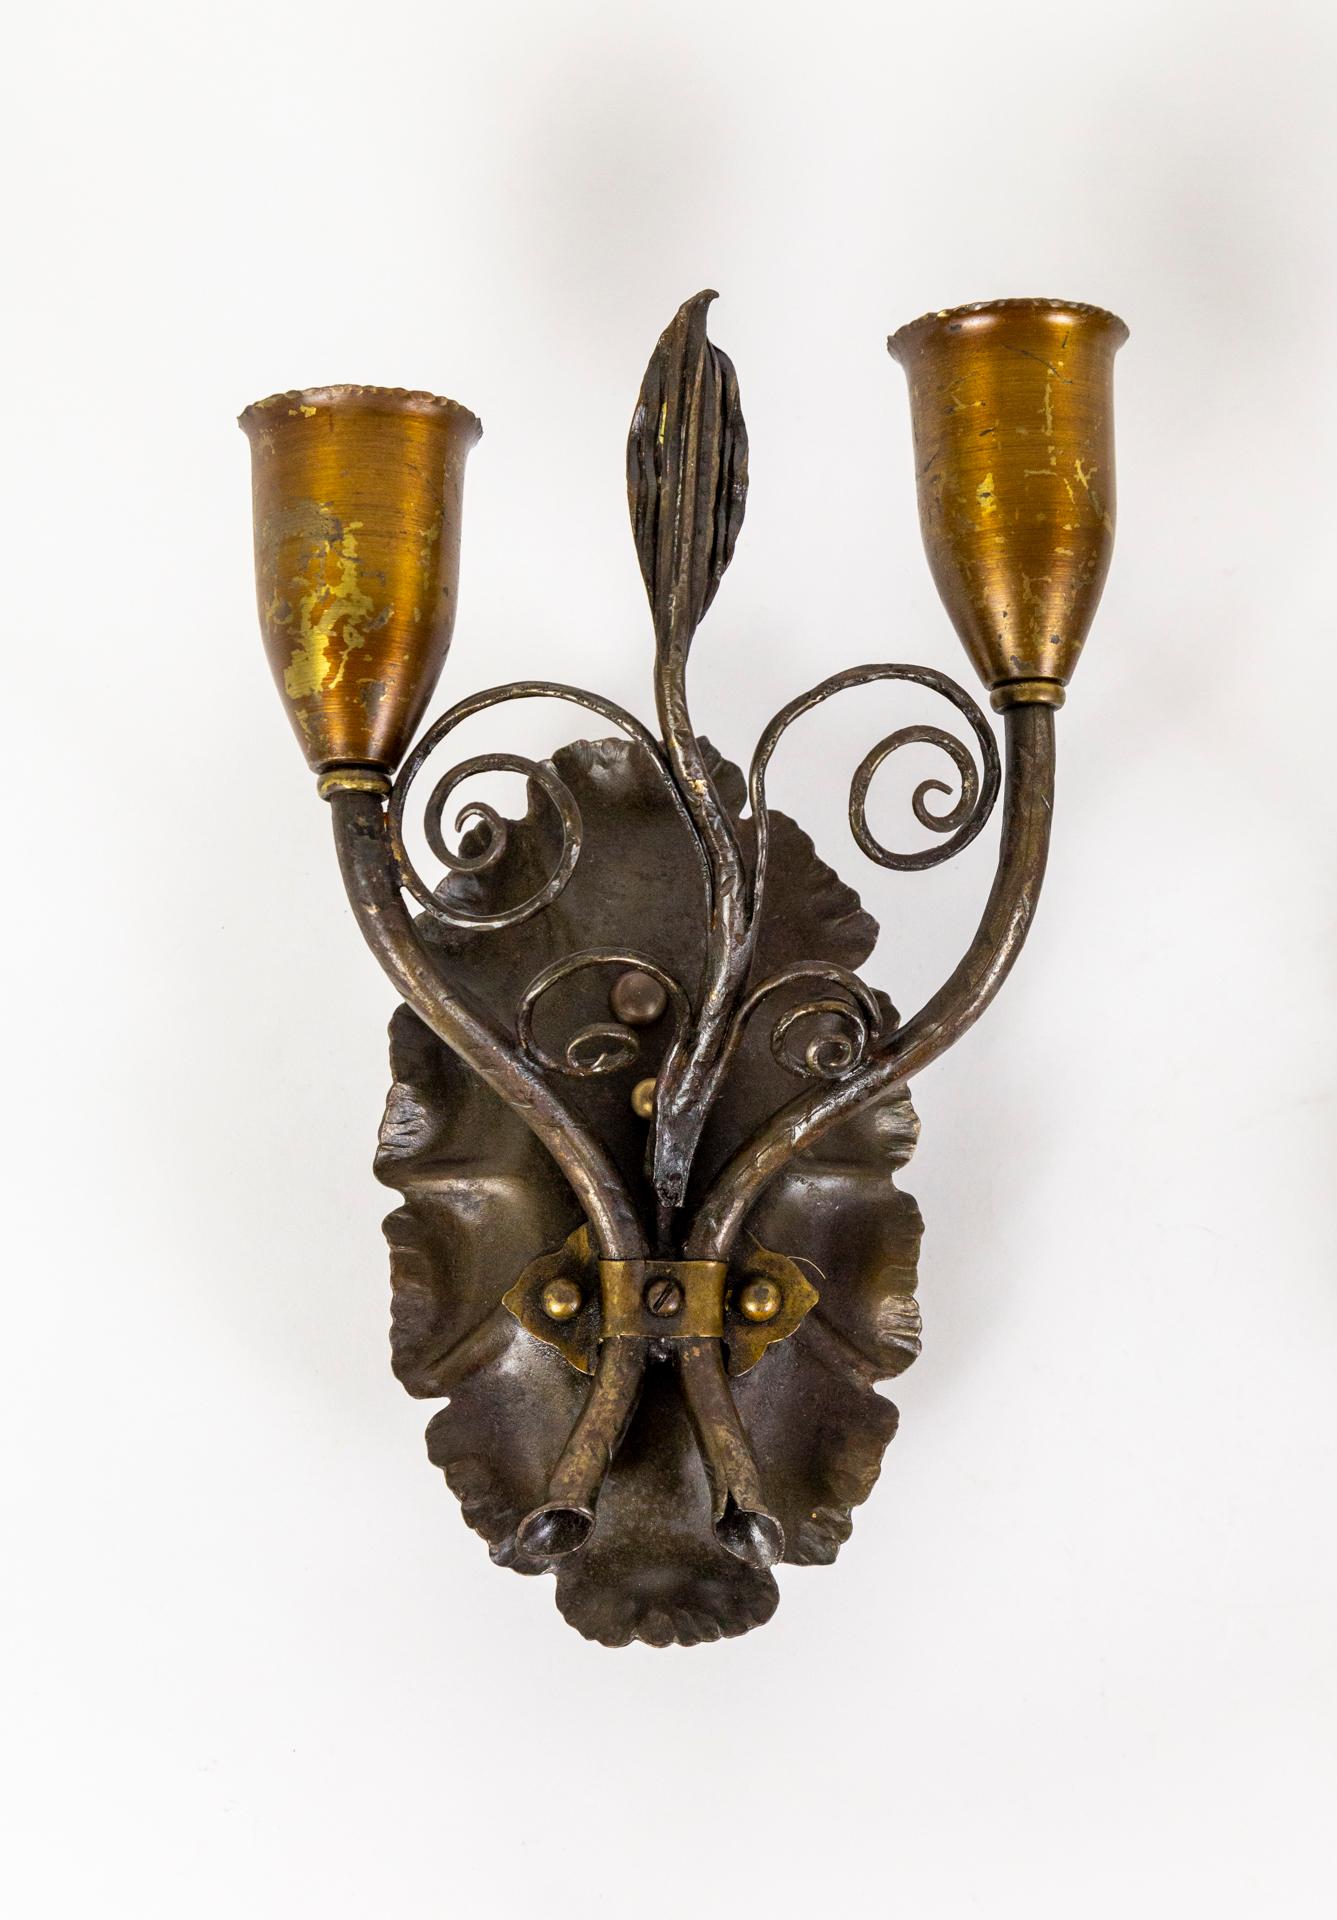 A pair of early 20th-century, iron and brass wall lights with two arms as elegant, trumpet stems fastened to scalloped oval back plates. They are detailed with a central, vine with a ribbed leaf and spiraling curls. They have a dark patinated body